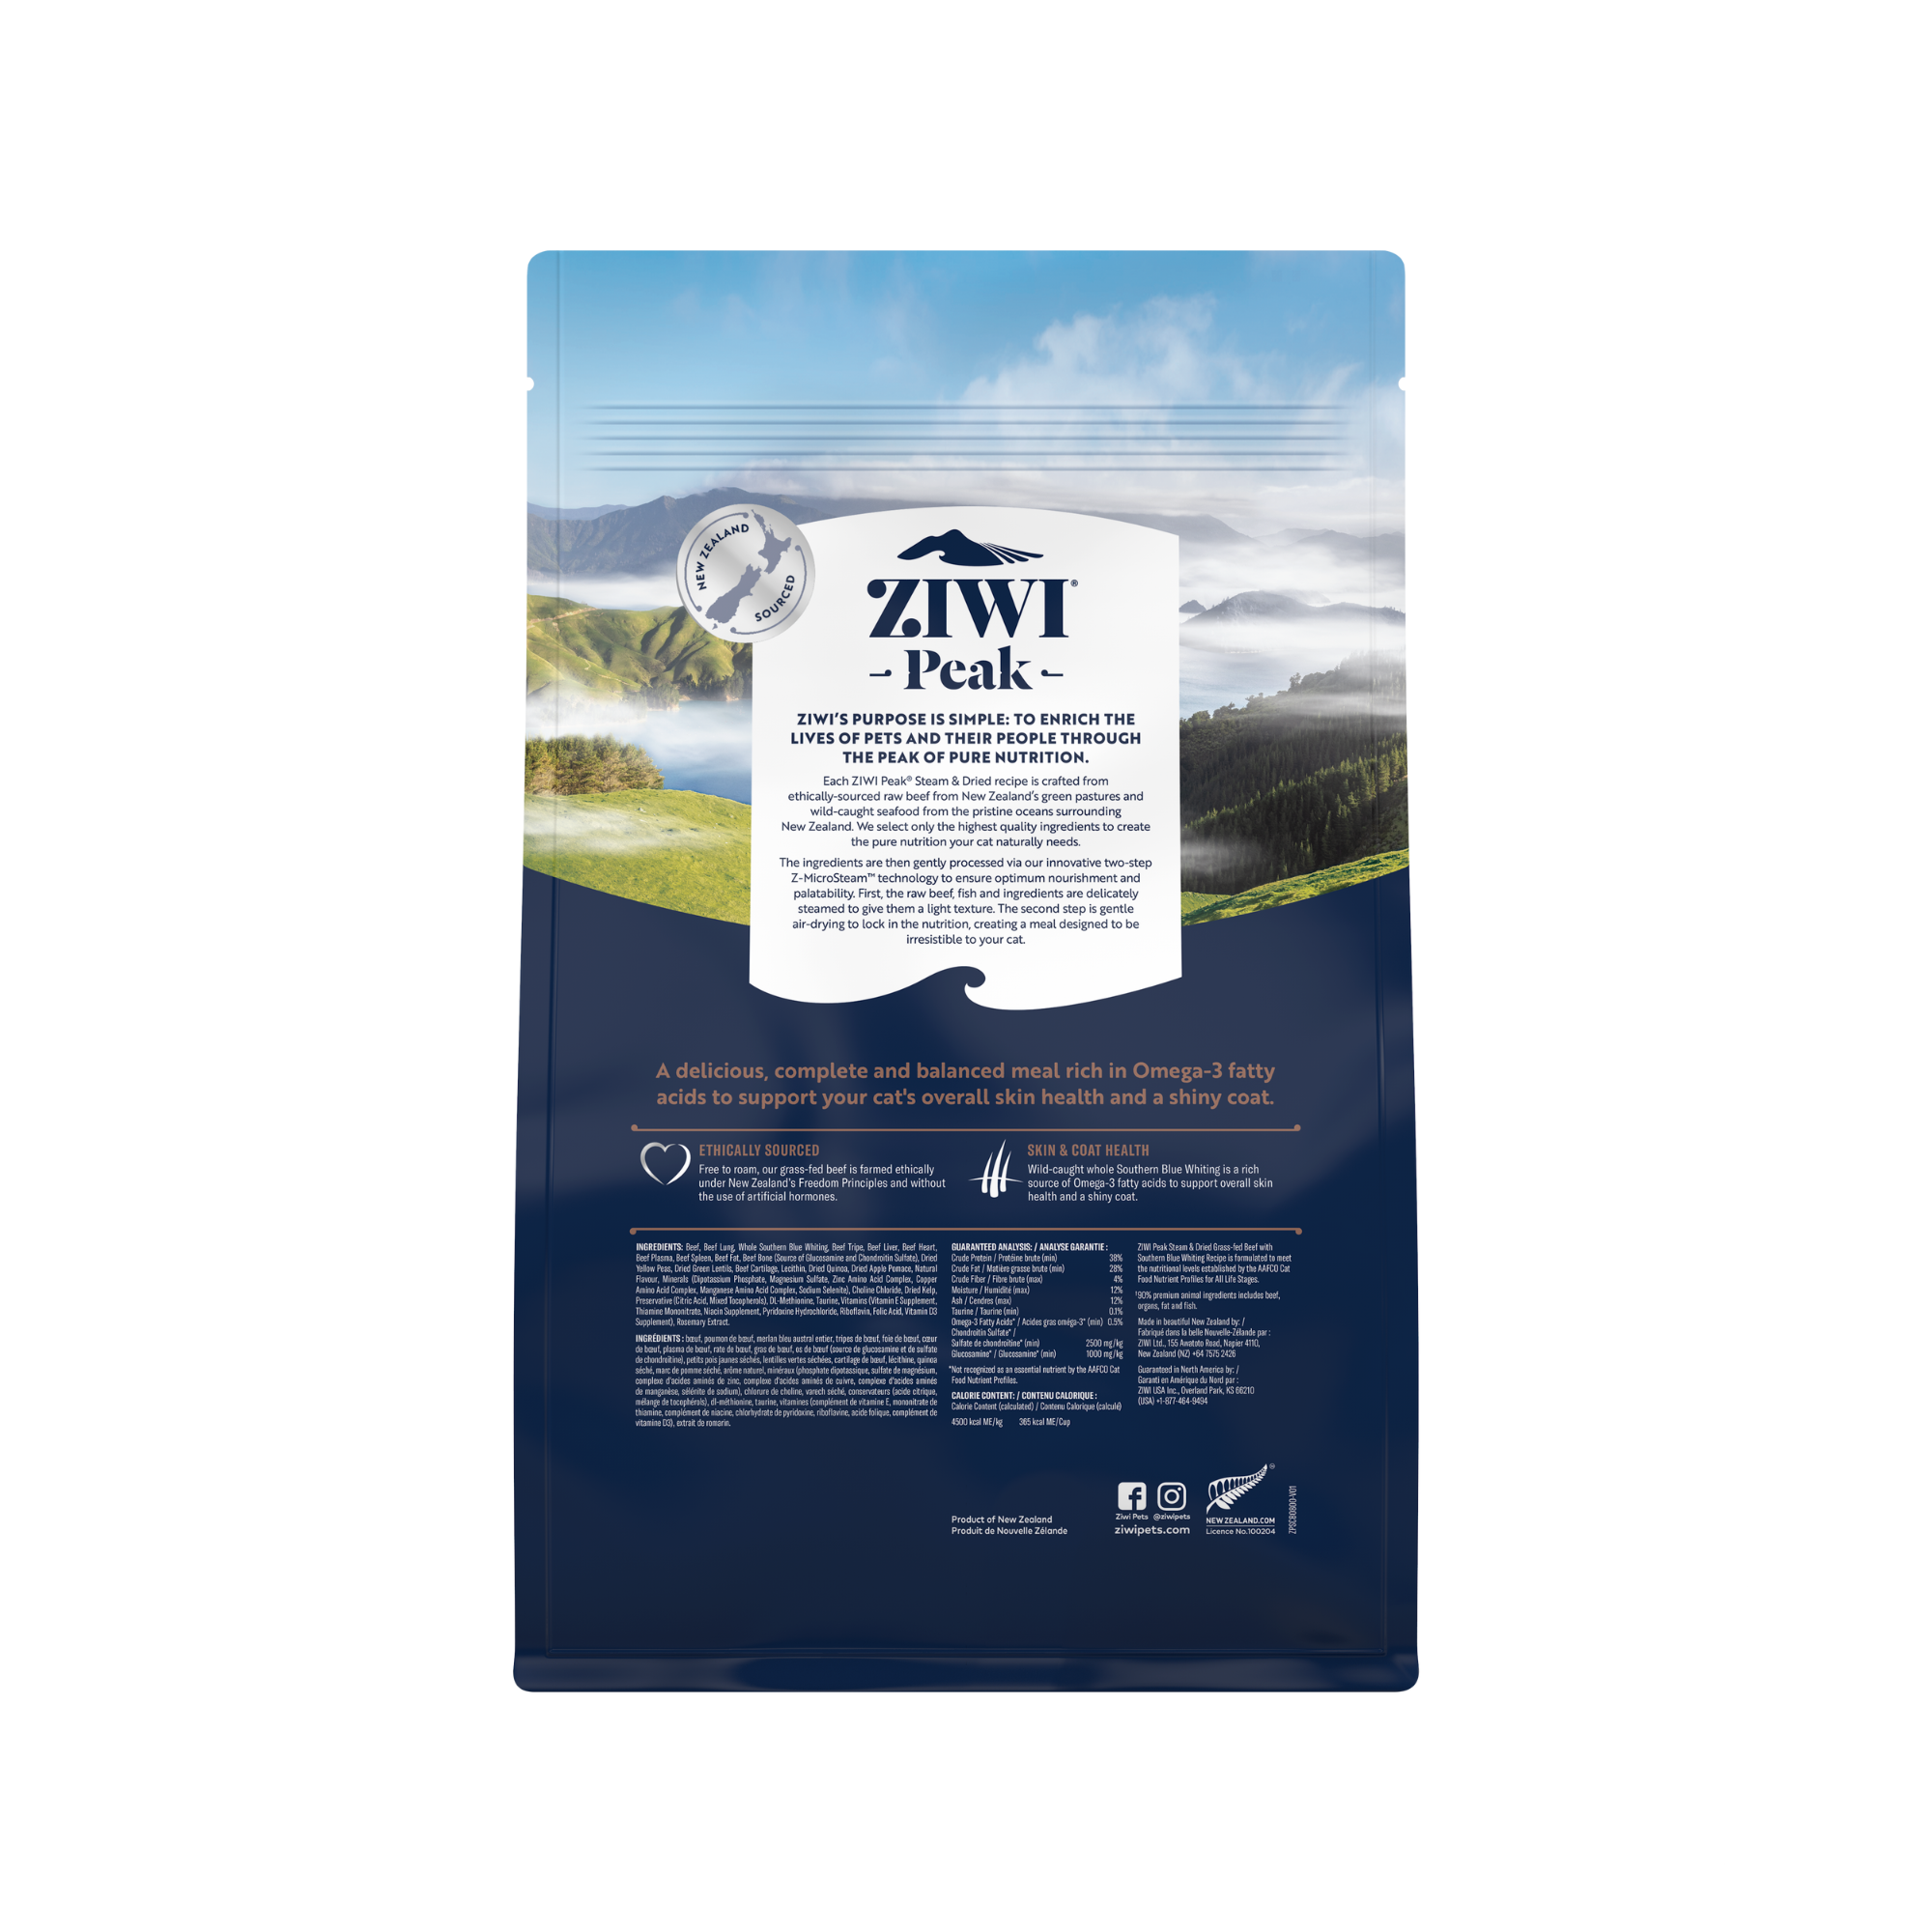 Ziwi Peak Steam & Dried Grass Fed Beef With Southern Blue Whiting Dry Cat Food